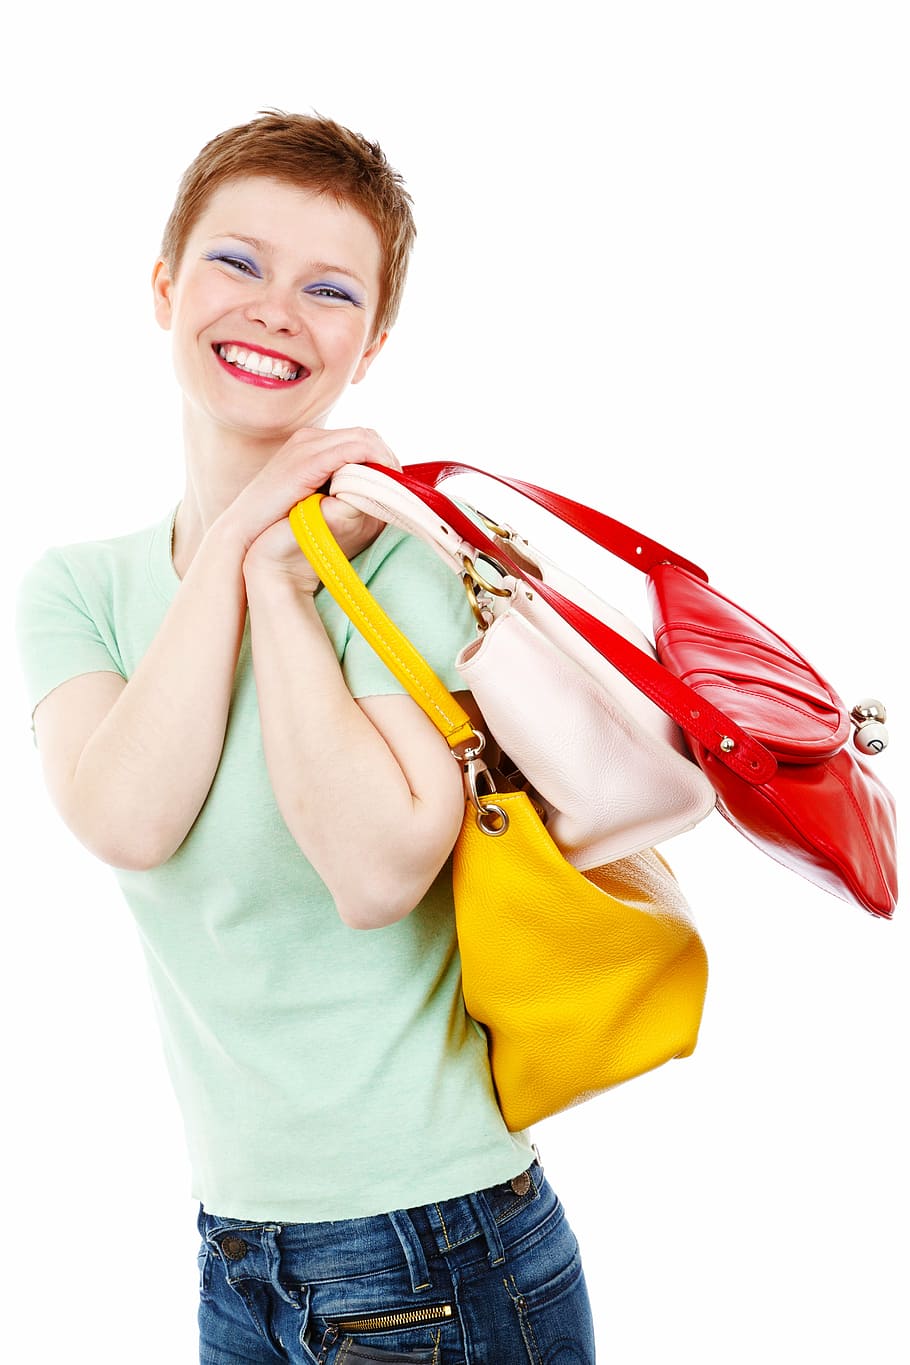 woman, holding, three, assorted-color handbags, adult, bag, bags, buy, buyer, consumer